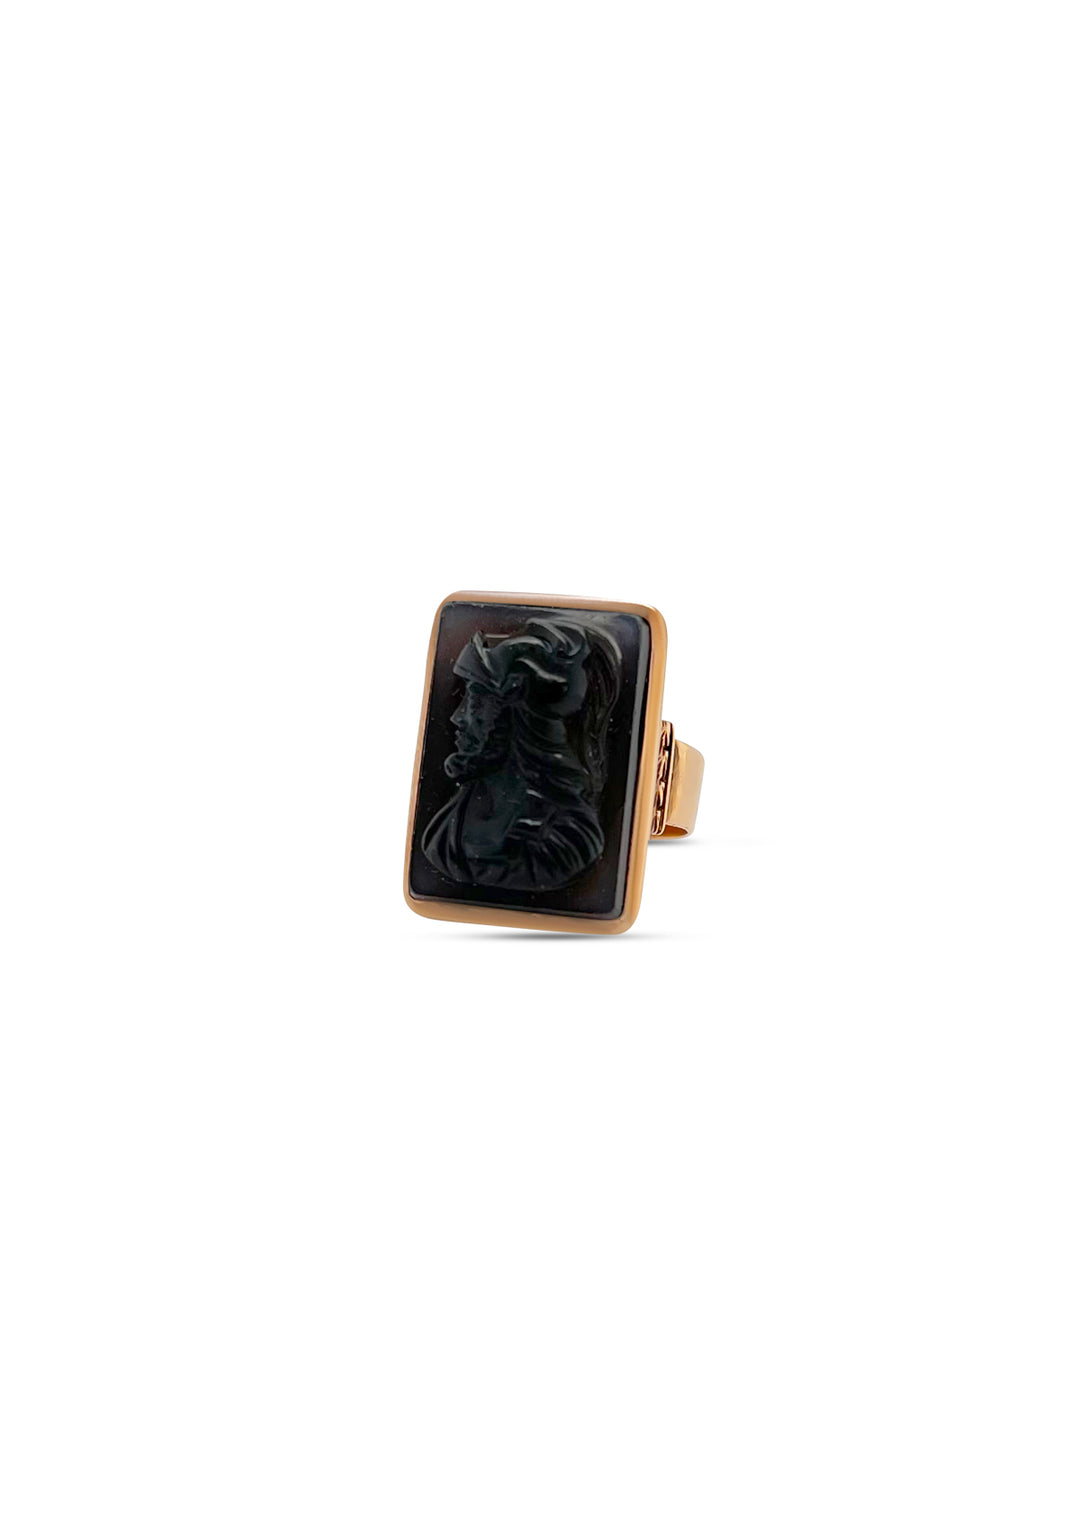 8K Yellow Gold 1910's Carved Agate Cameo Ring